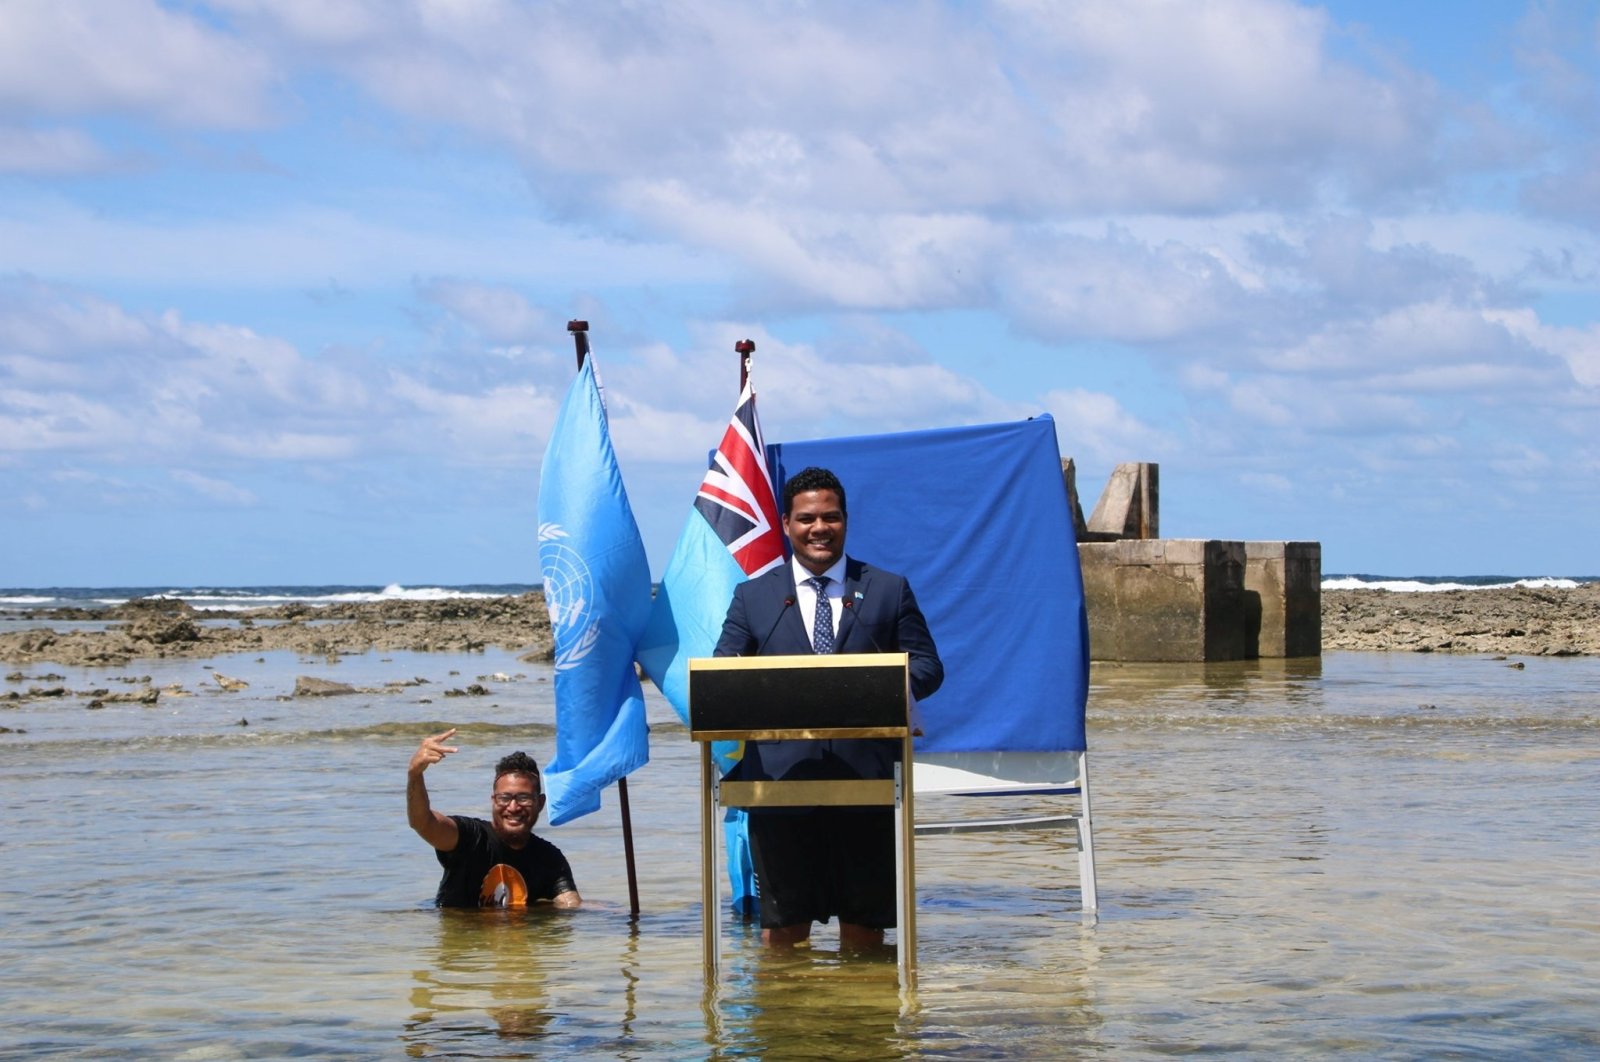 Tuvalu's Minister for Justice, Communication & Foreign Affairs, Simon Kofe gives a COP26 statement while standing in the ocean in Funafuti, Tuvalu, Nov. 5, 2021. (Tuvalu's Ministry of Justice, Communication and Foreign Affairs via Reuters)